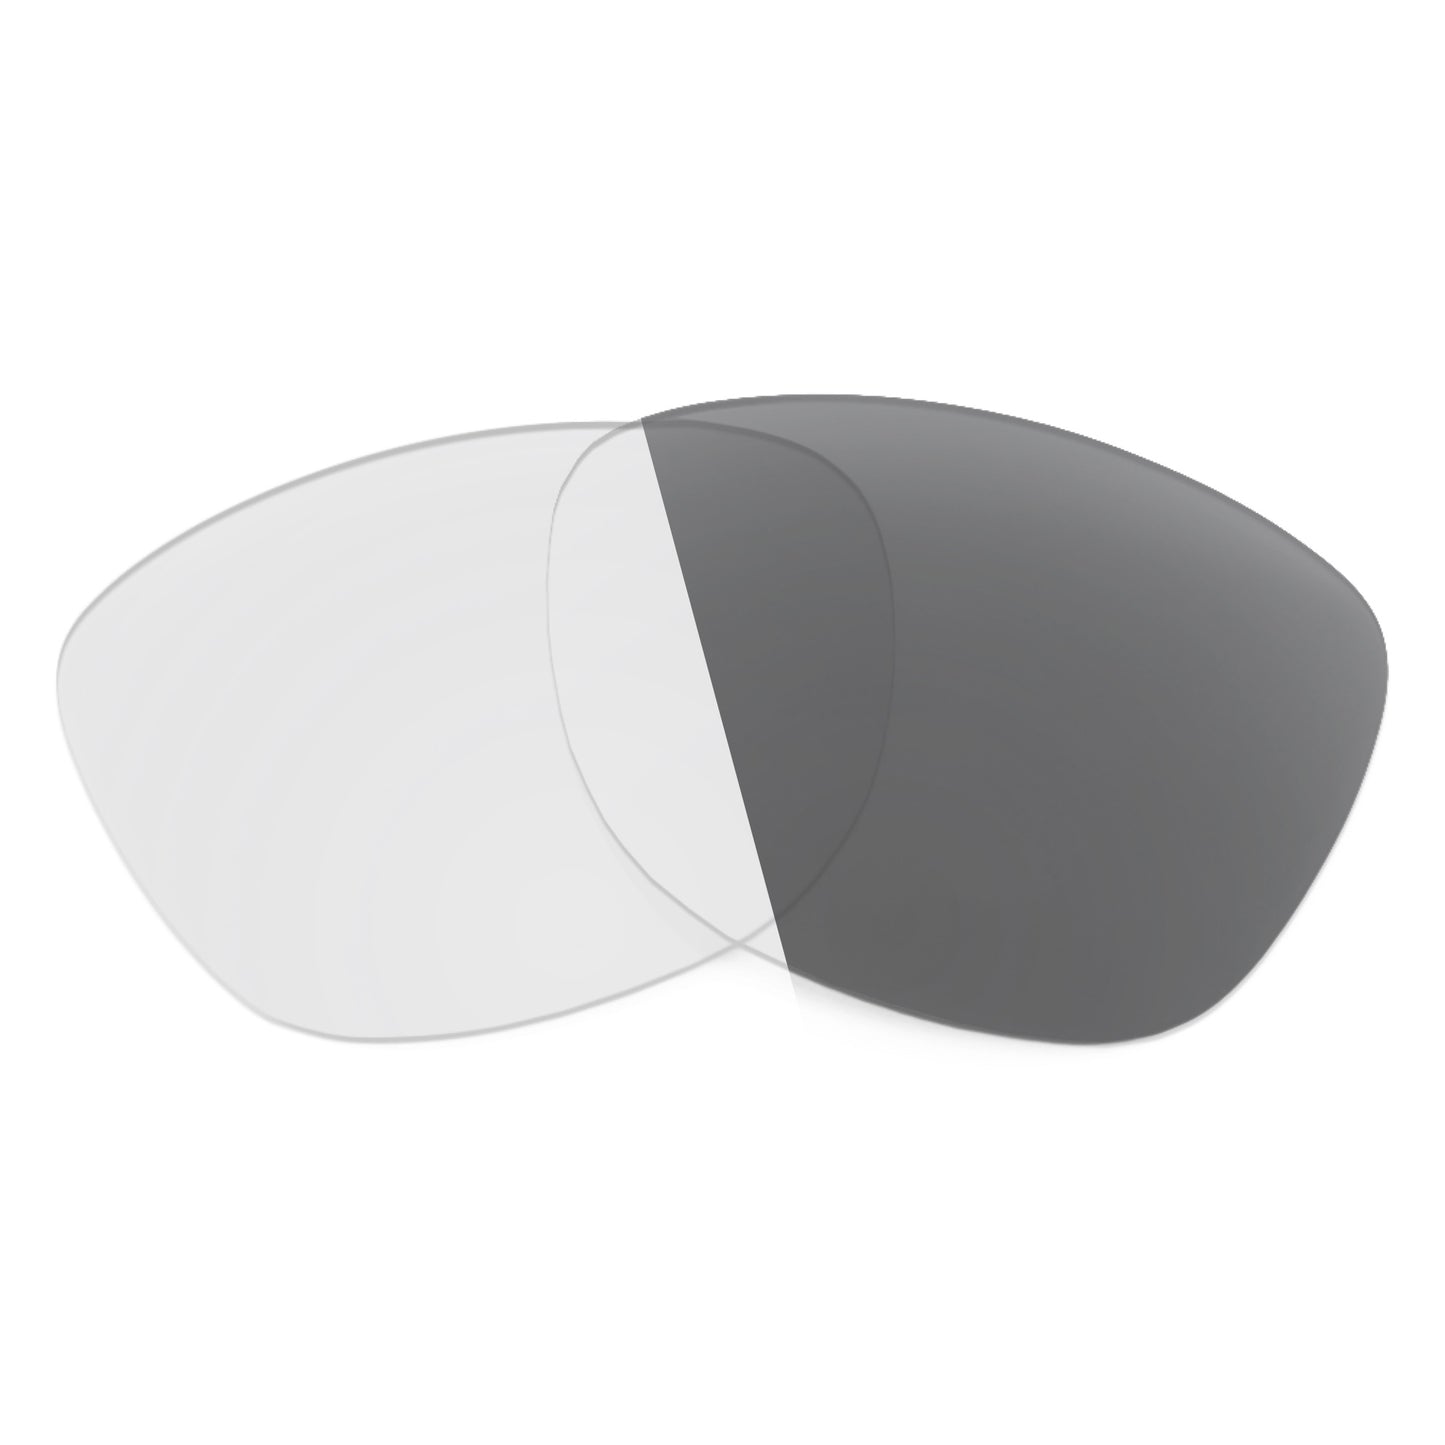 Revant replacement lenses for Ray-Ban Meteor Classic RB2168 50mm Non-Polarized Adapt Gray Photochromic